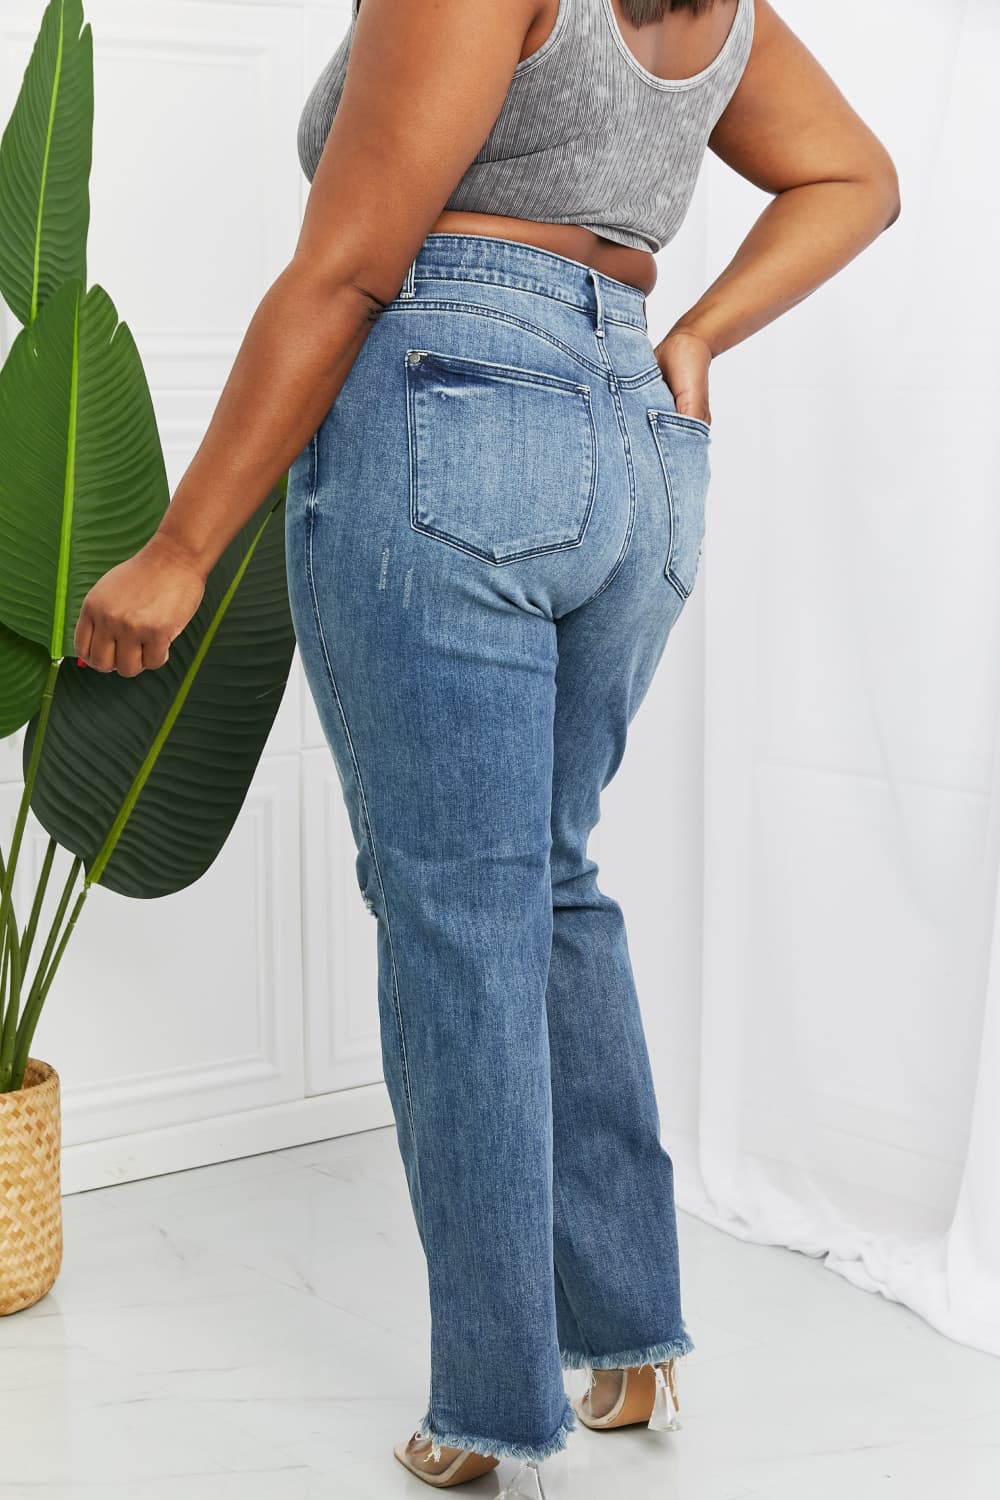 Back View, Plus Size, Judy Blue, Hi-Waisted Straight Leg w/Destroy Knee Jeans Style 82498